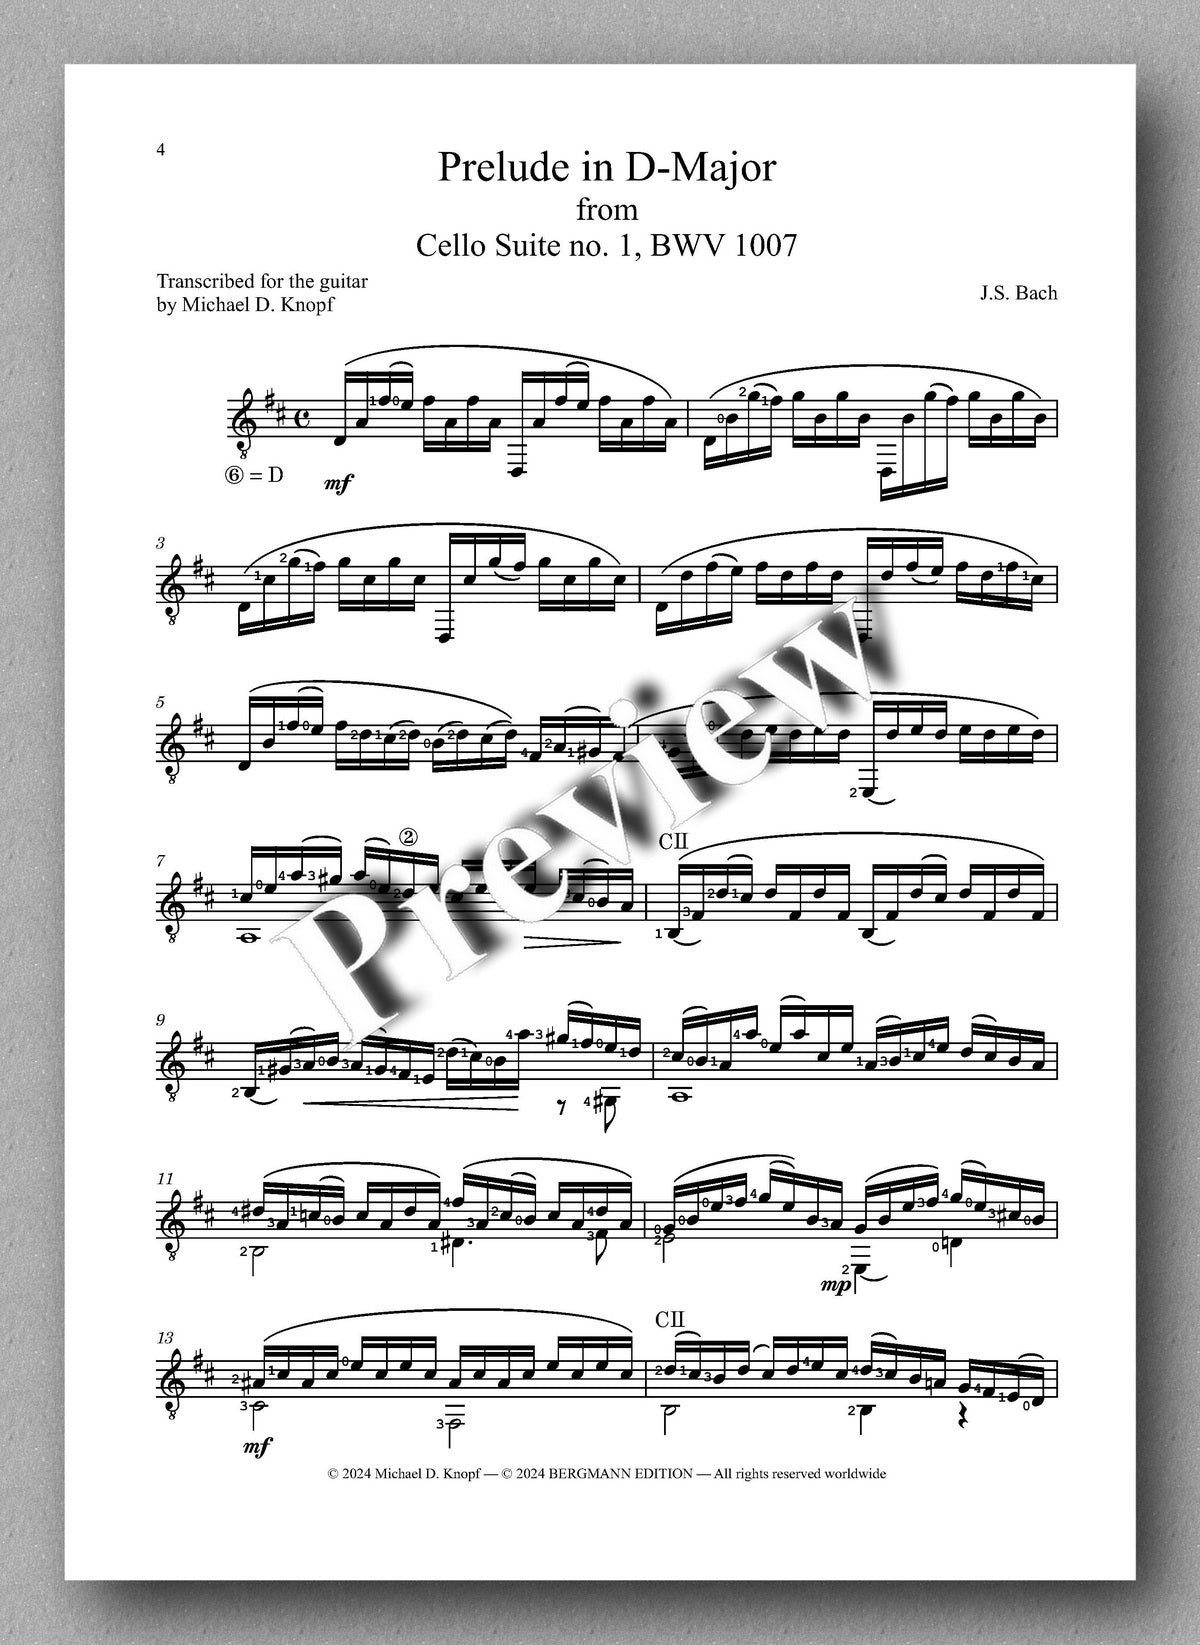 J.S.Bach, Prelude in D-Major, BWV1007 - preview of the music score